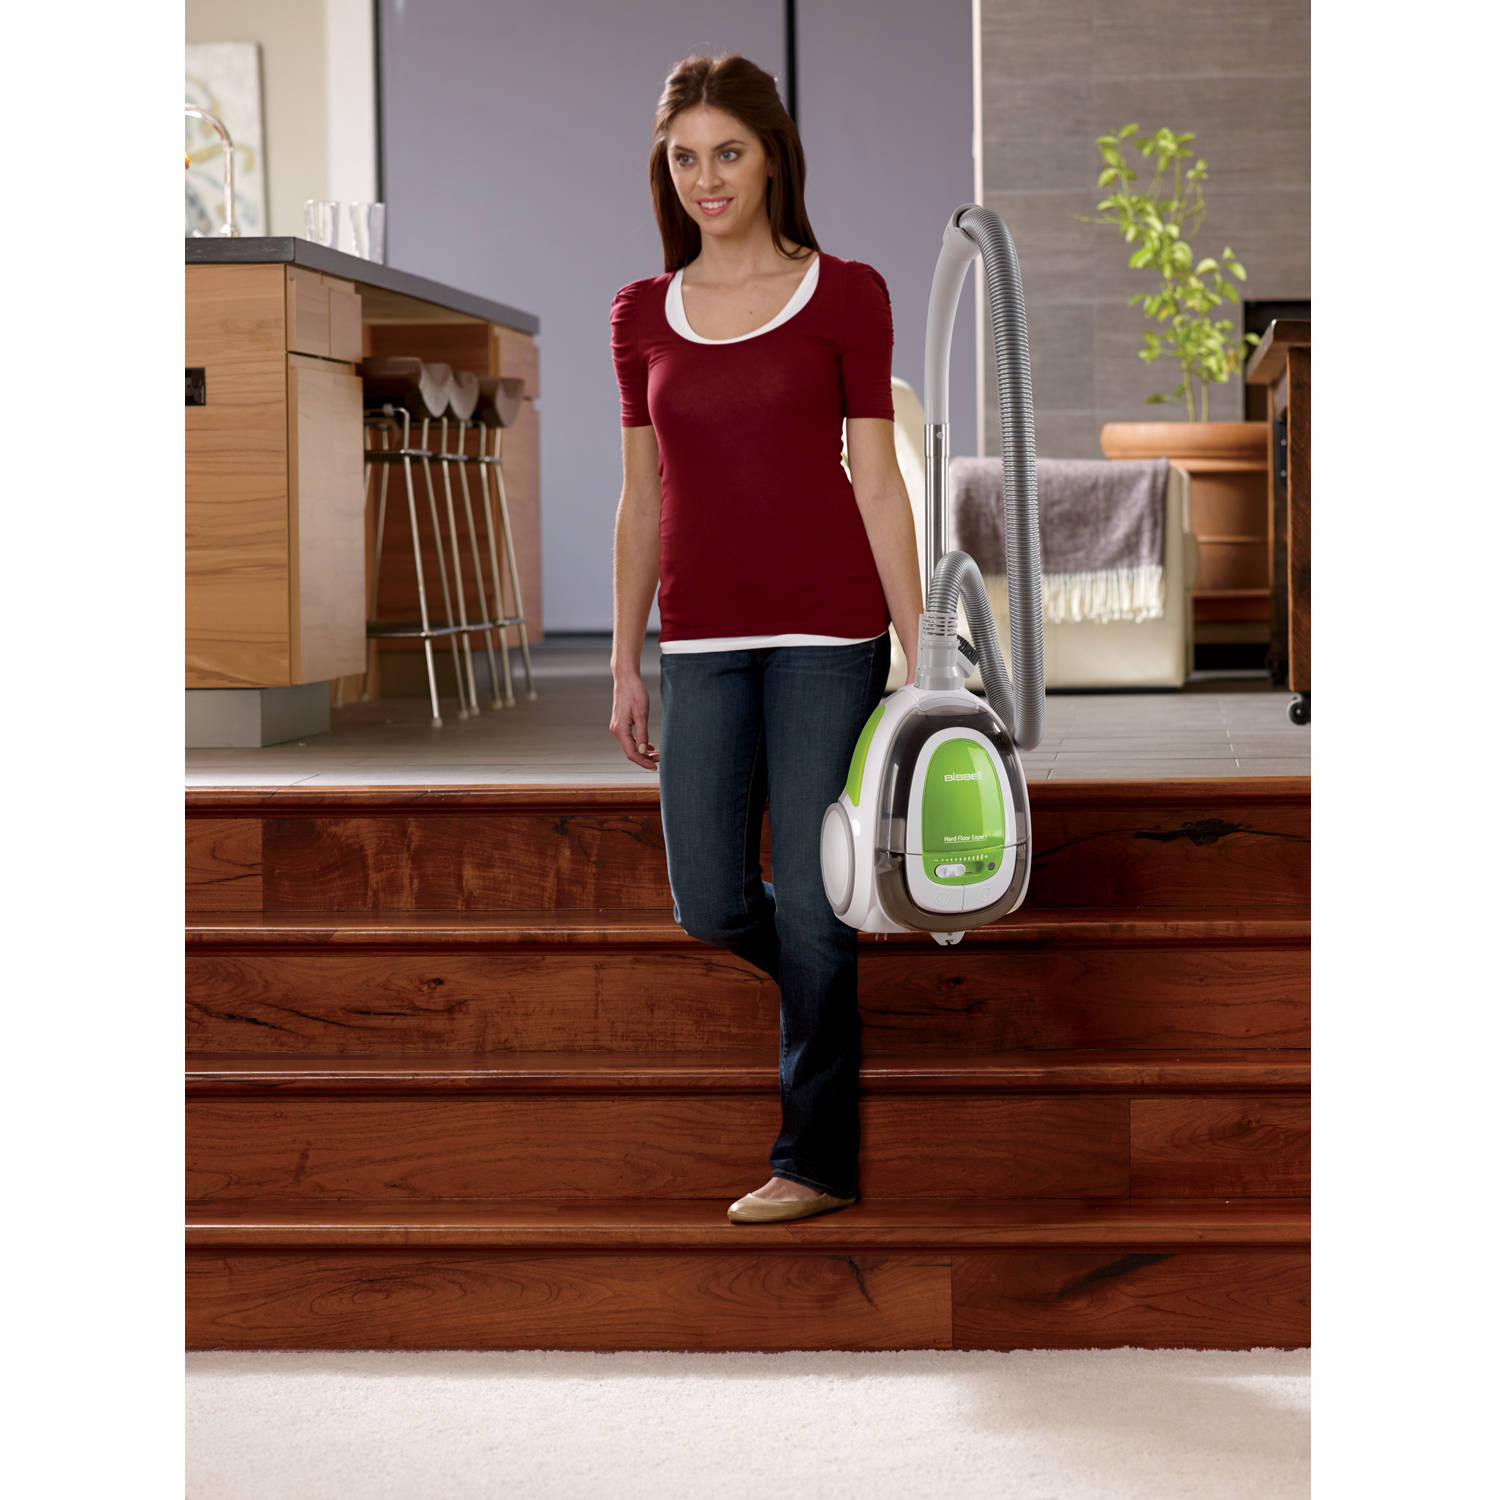 Bissell Hard Floor Expert Canister Vacuum - 1154W in Silver and Green - image 4 of 10